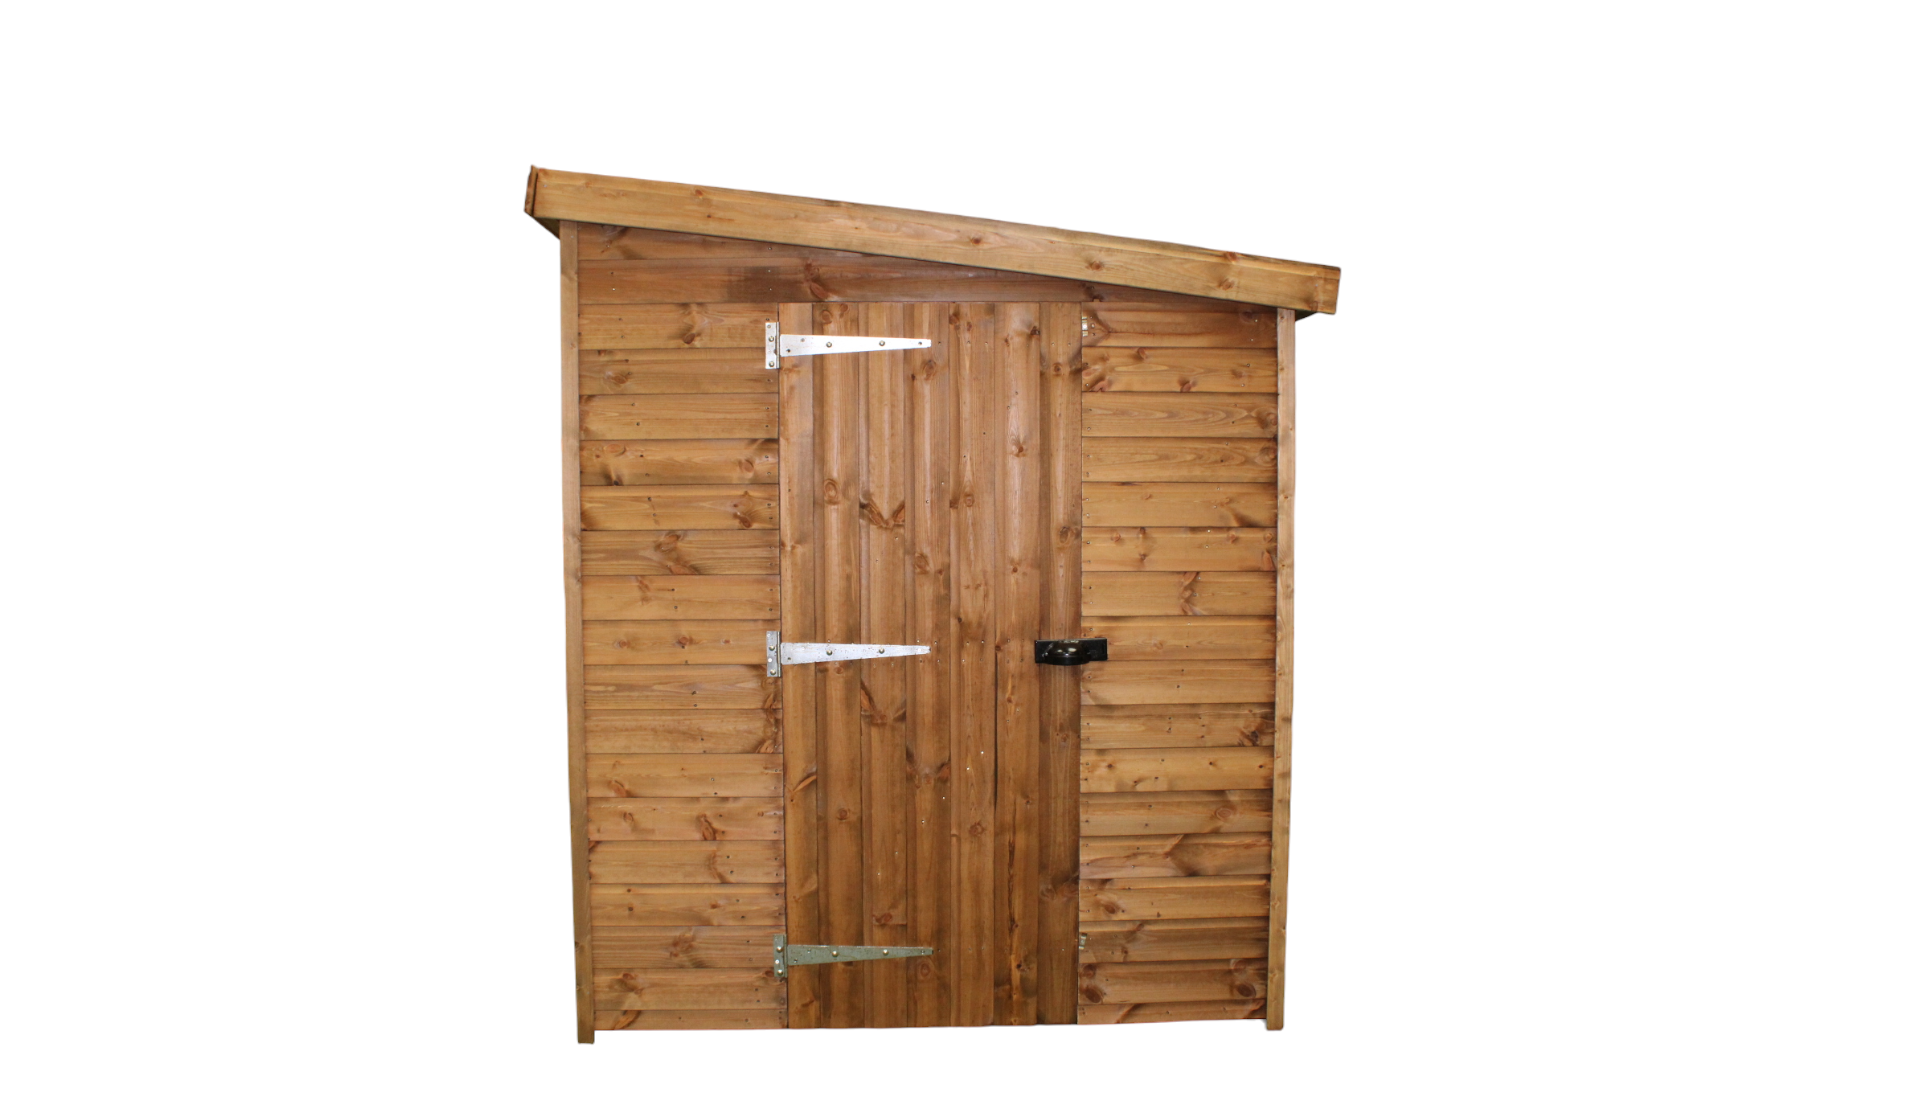 12x6 BRAND NEWc security pent shed, Standard 16mm Nominal Cladding £2,049 - Image 6 of 8